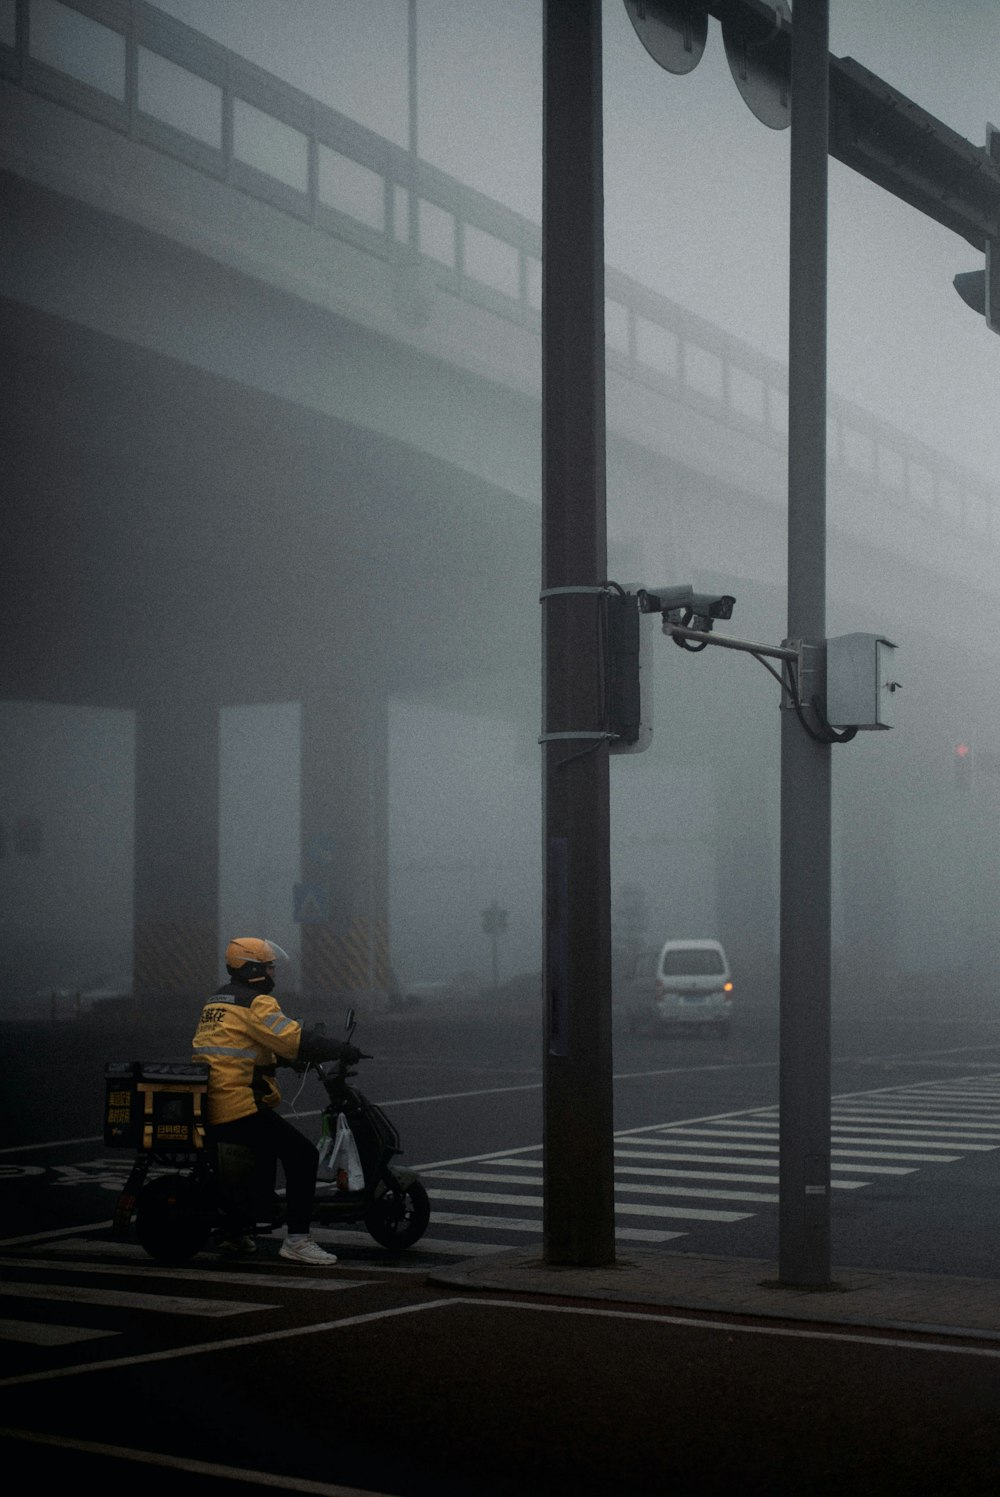 a person riding a motorcycle on a foggy street